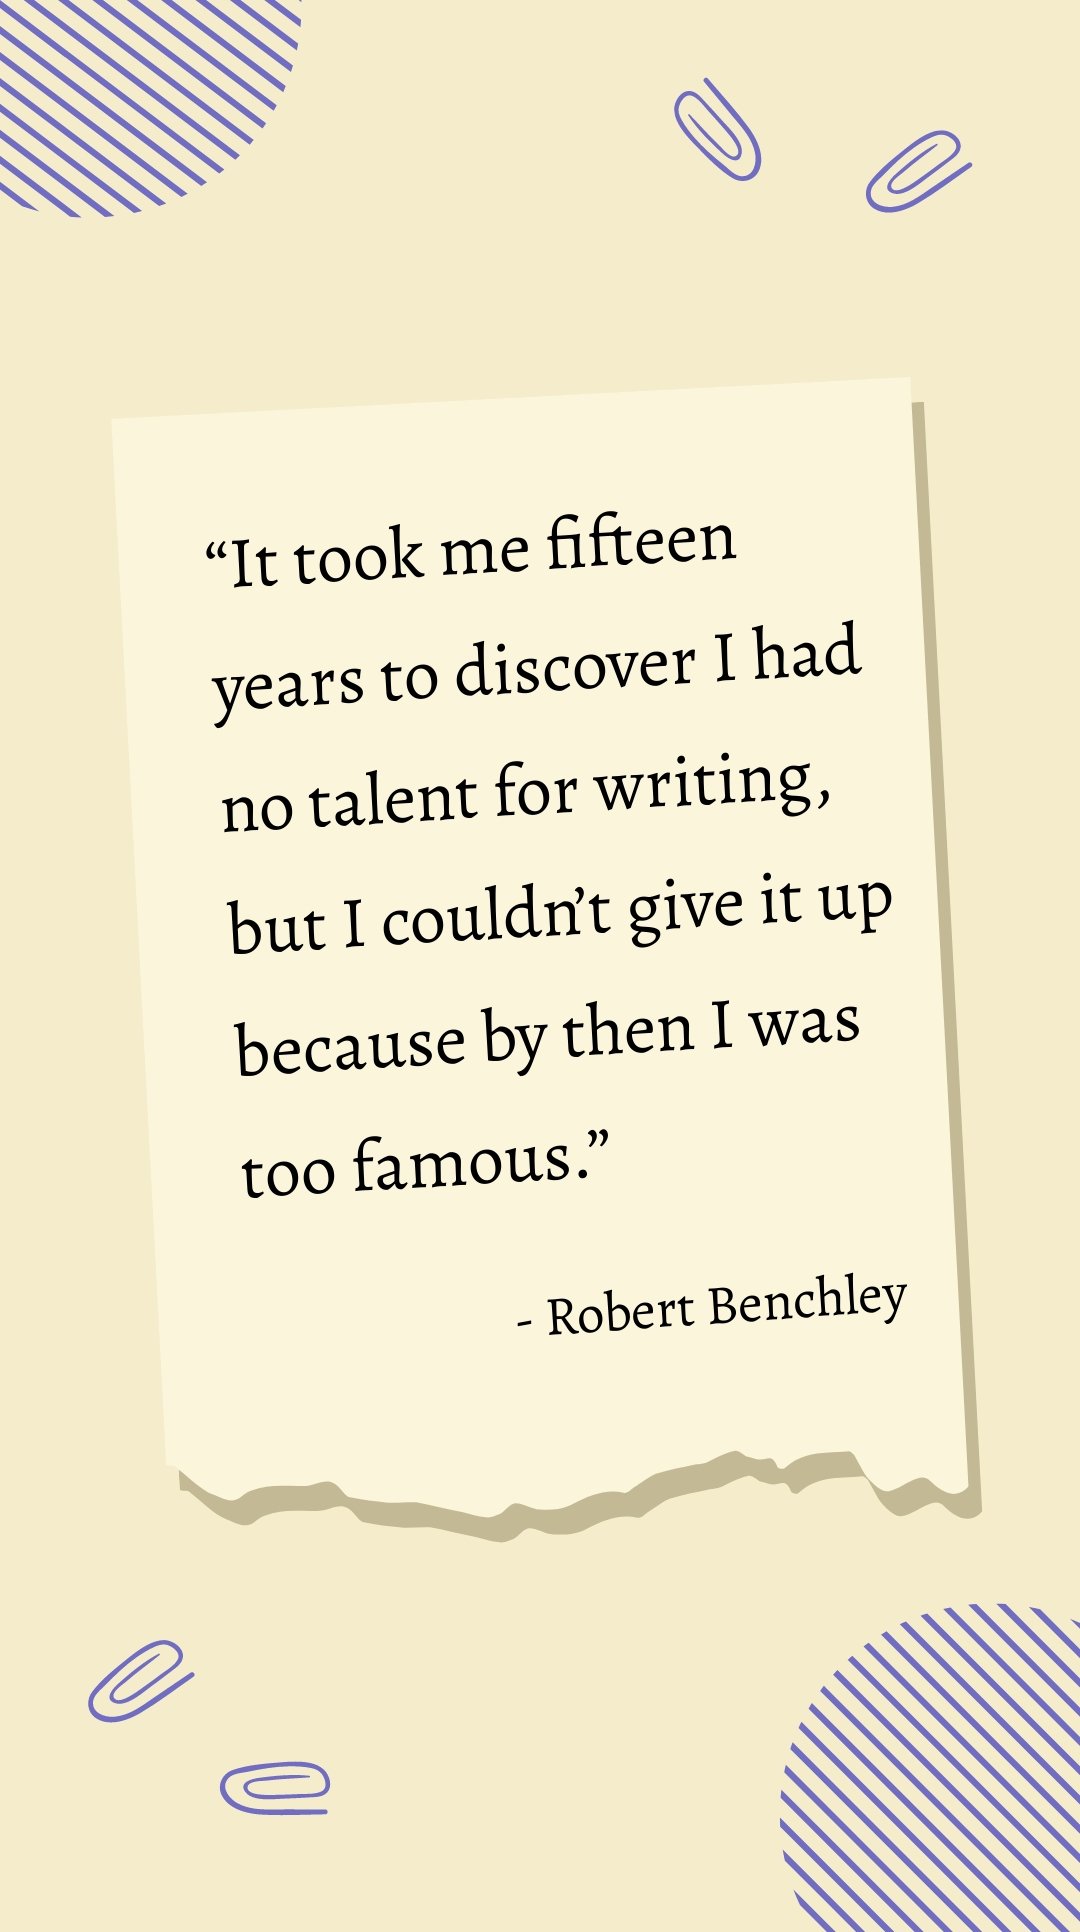 Robert Benchley - It took me fifteen years to discover I had no talent for writing, but I couldn’t give it up because by then I was too famous.